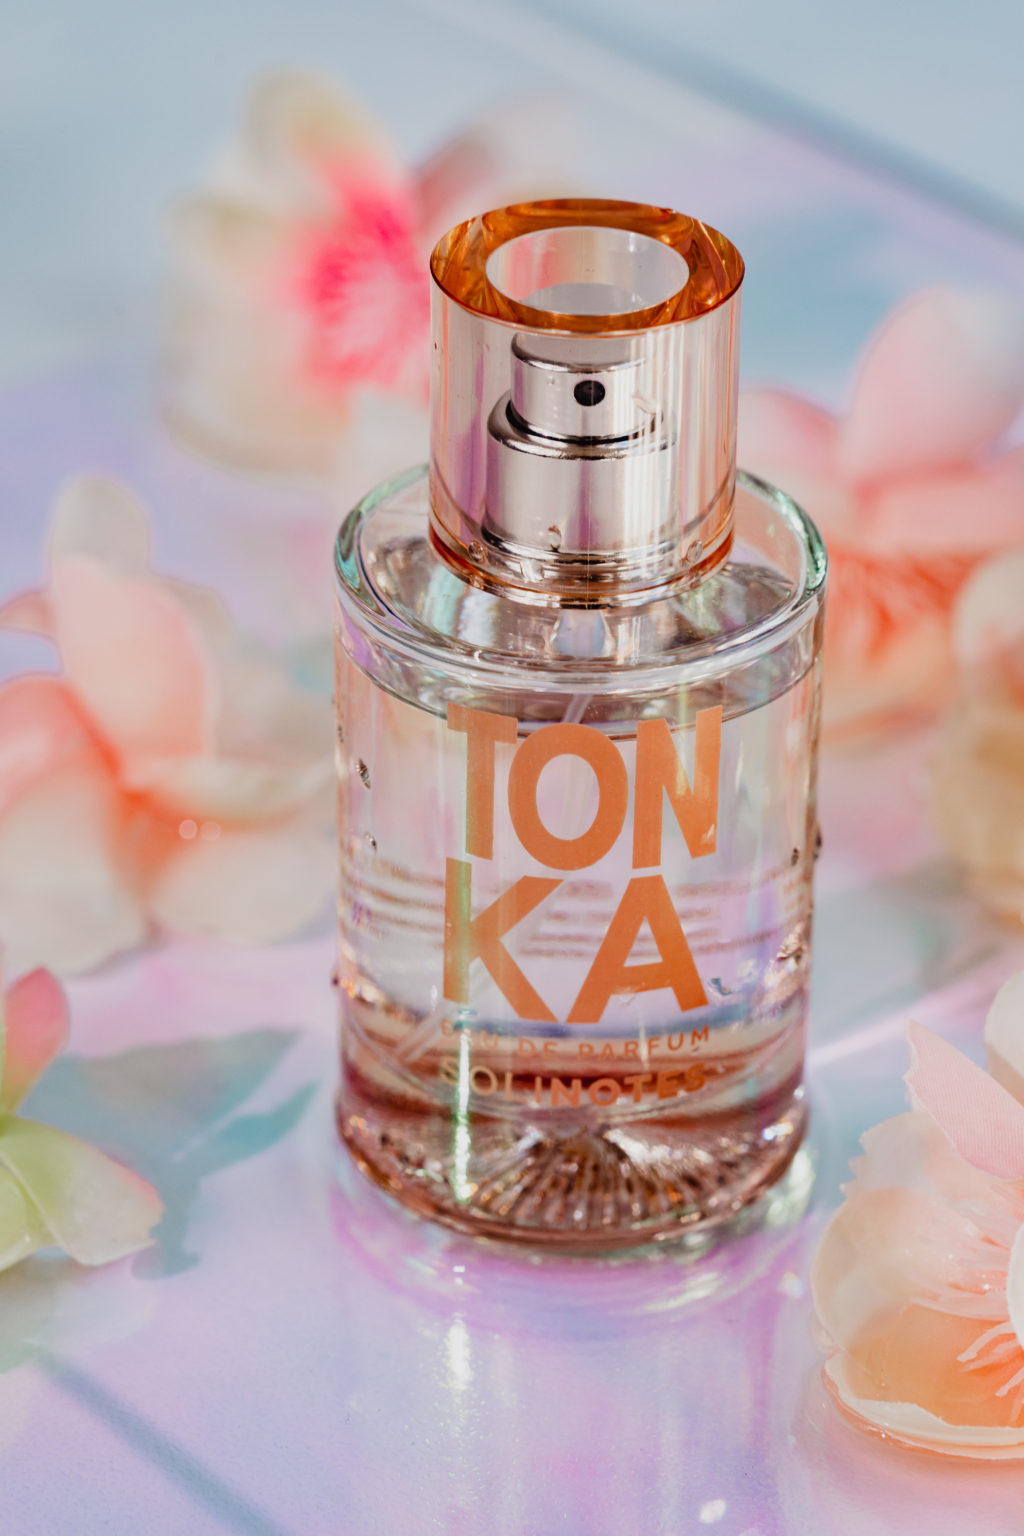 Image of Tonka perfume. Flowers are in the background.